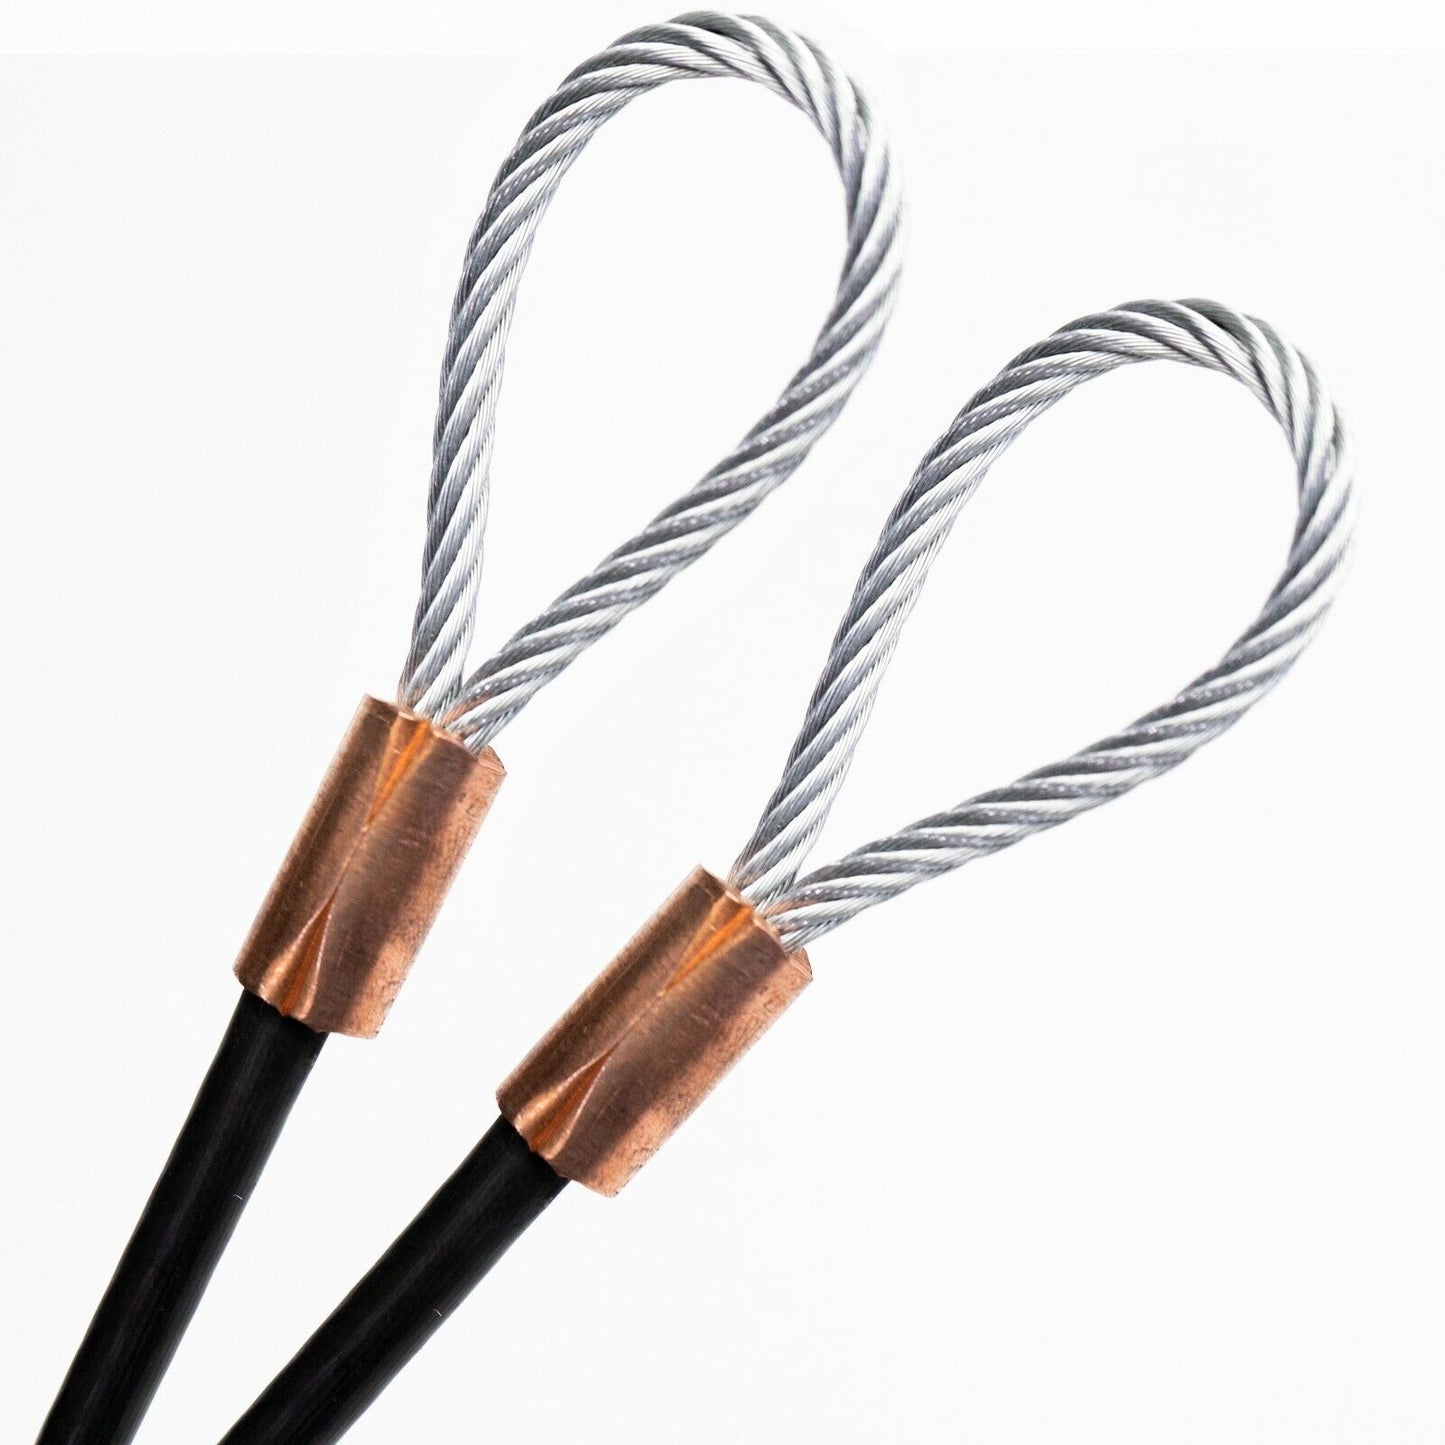 1-100ft Cut To Size 1/4 Galvanized Steel Cable BLACK Vinyl Coated To 3/16 With Copper Sleeves MADE IN USA